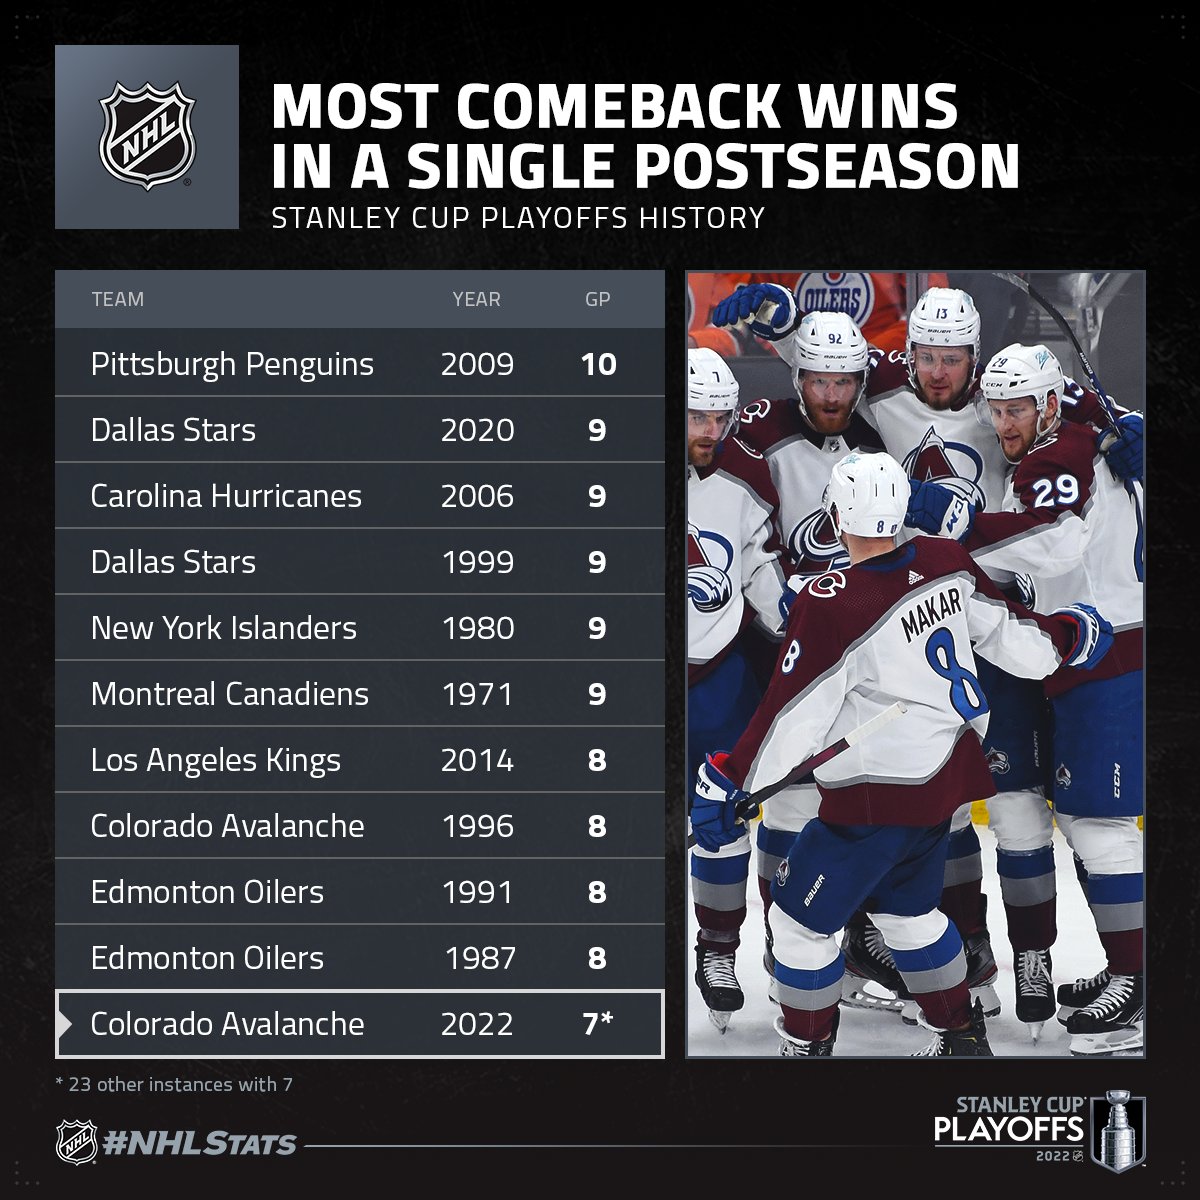 NHL Public Relations on X: Pavel Francouz improved to 5-0 in the 2022  #StanleyCup Playoffs. The only goaltenders in @Avalanche / Nordiques  history to have a longer postseason win streak are Mario